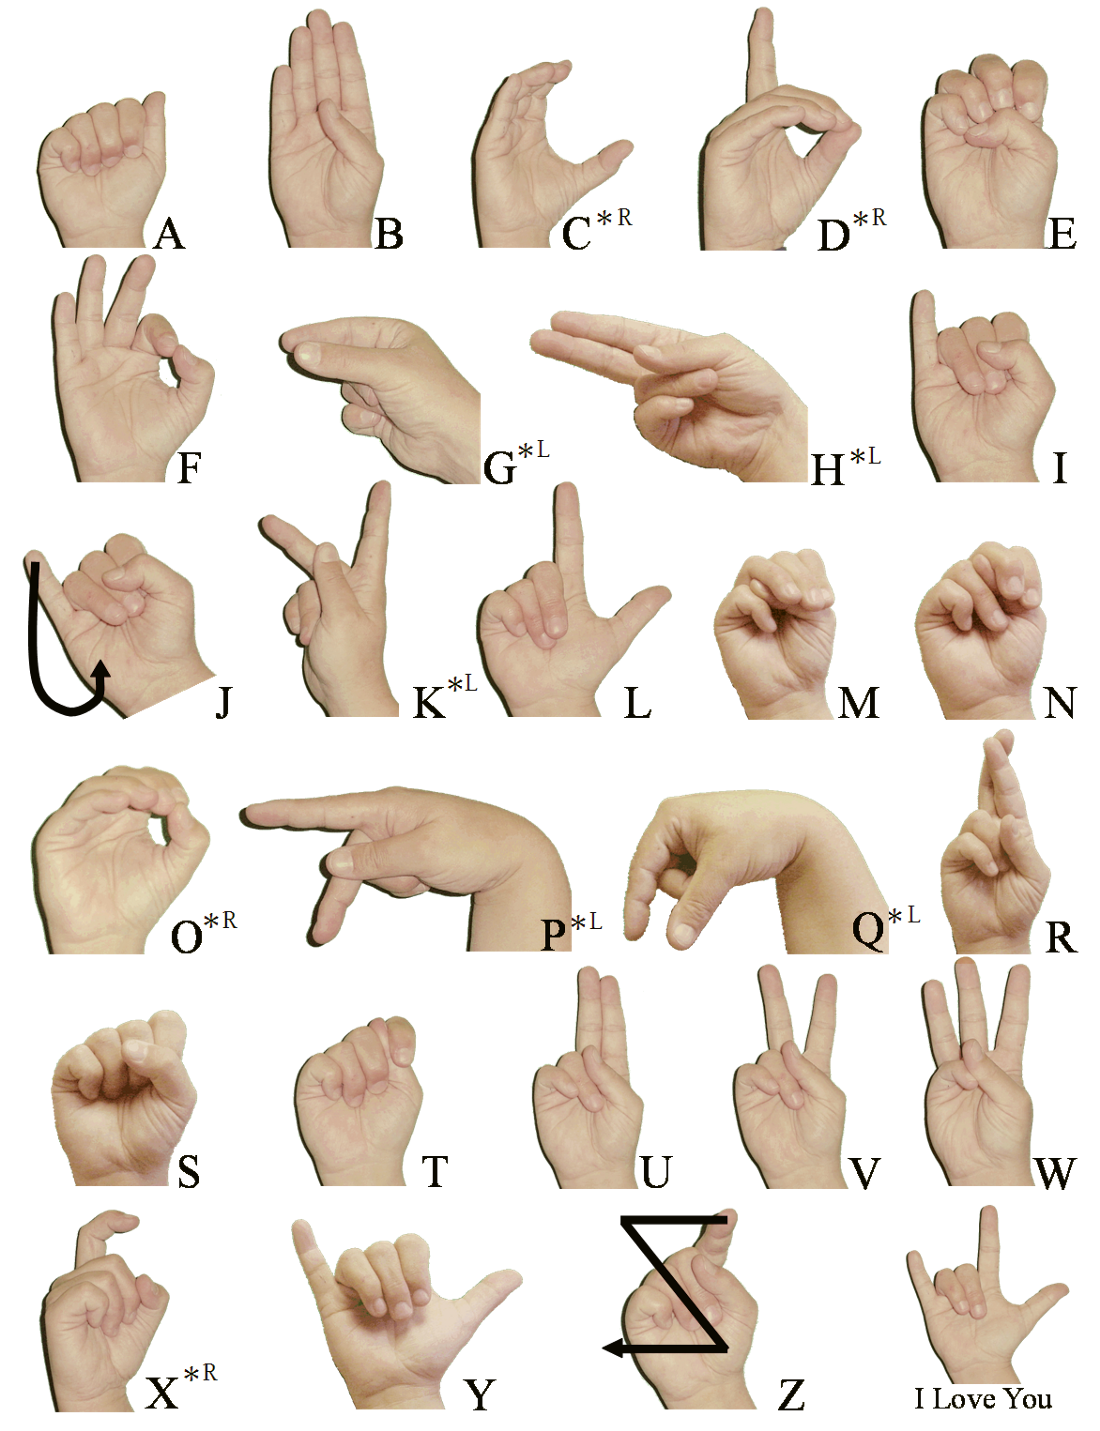 sign-language-and-static-gesture-recognition-using-scikit-learn